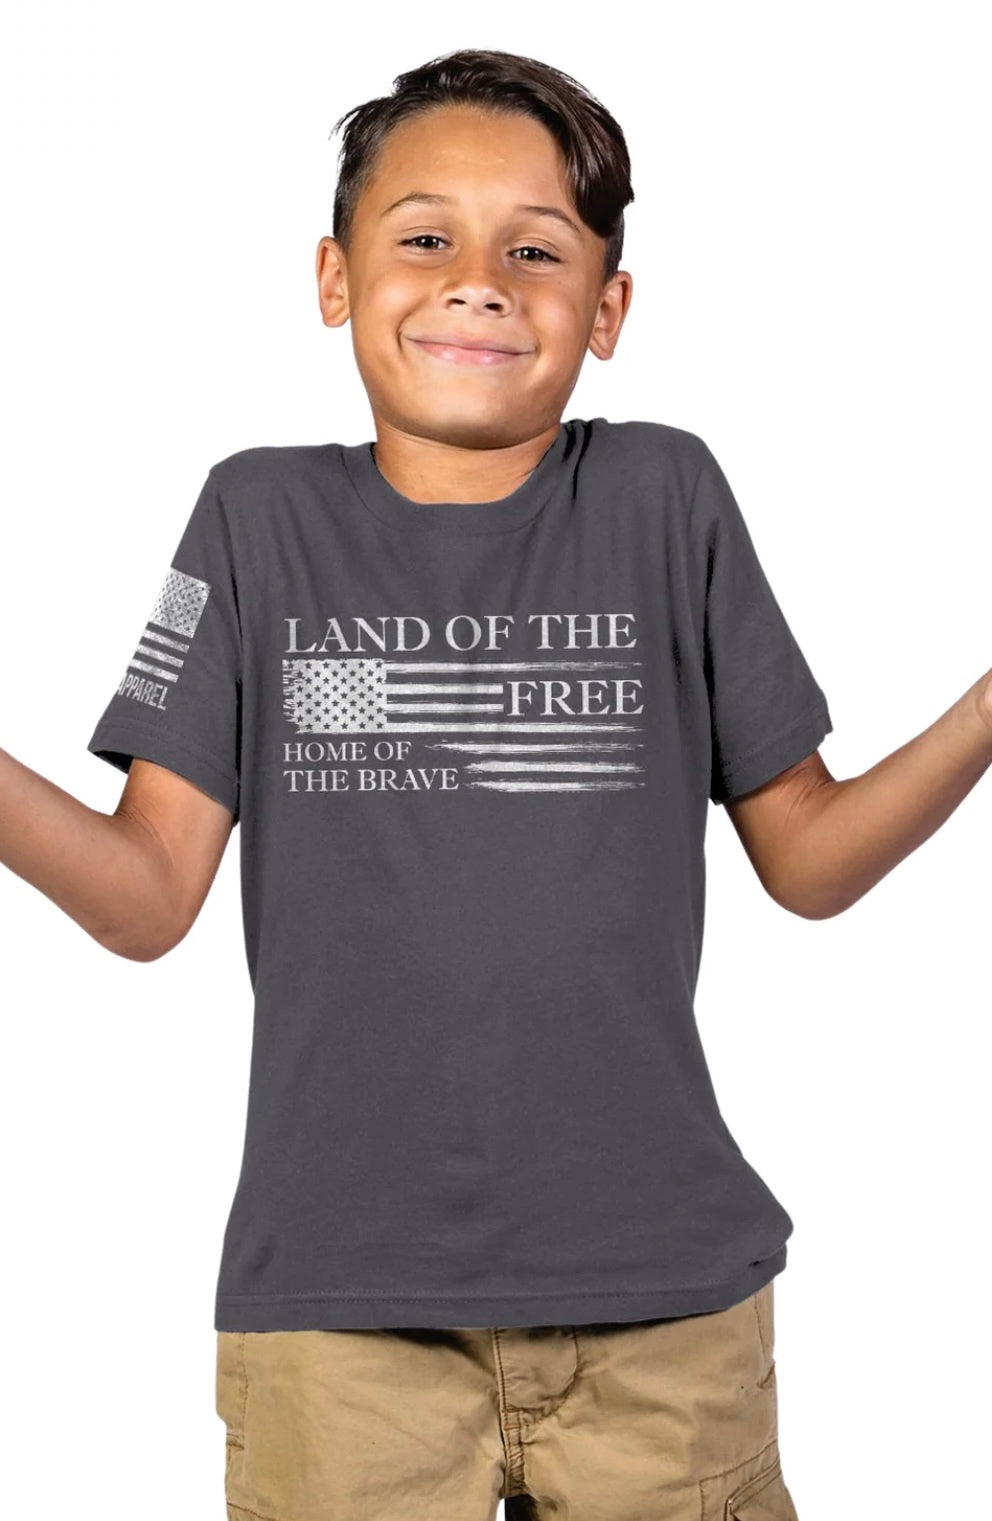 Home of the Brave Youth Tee